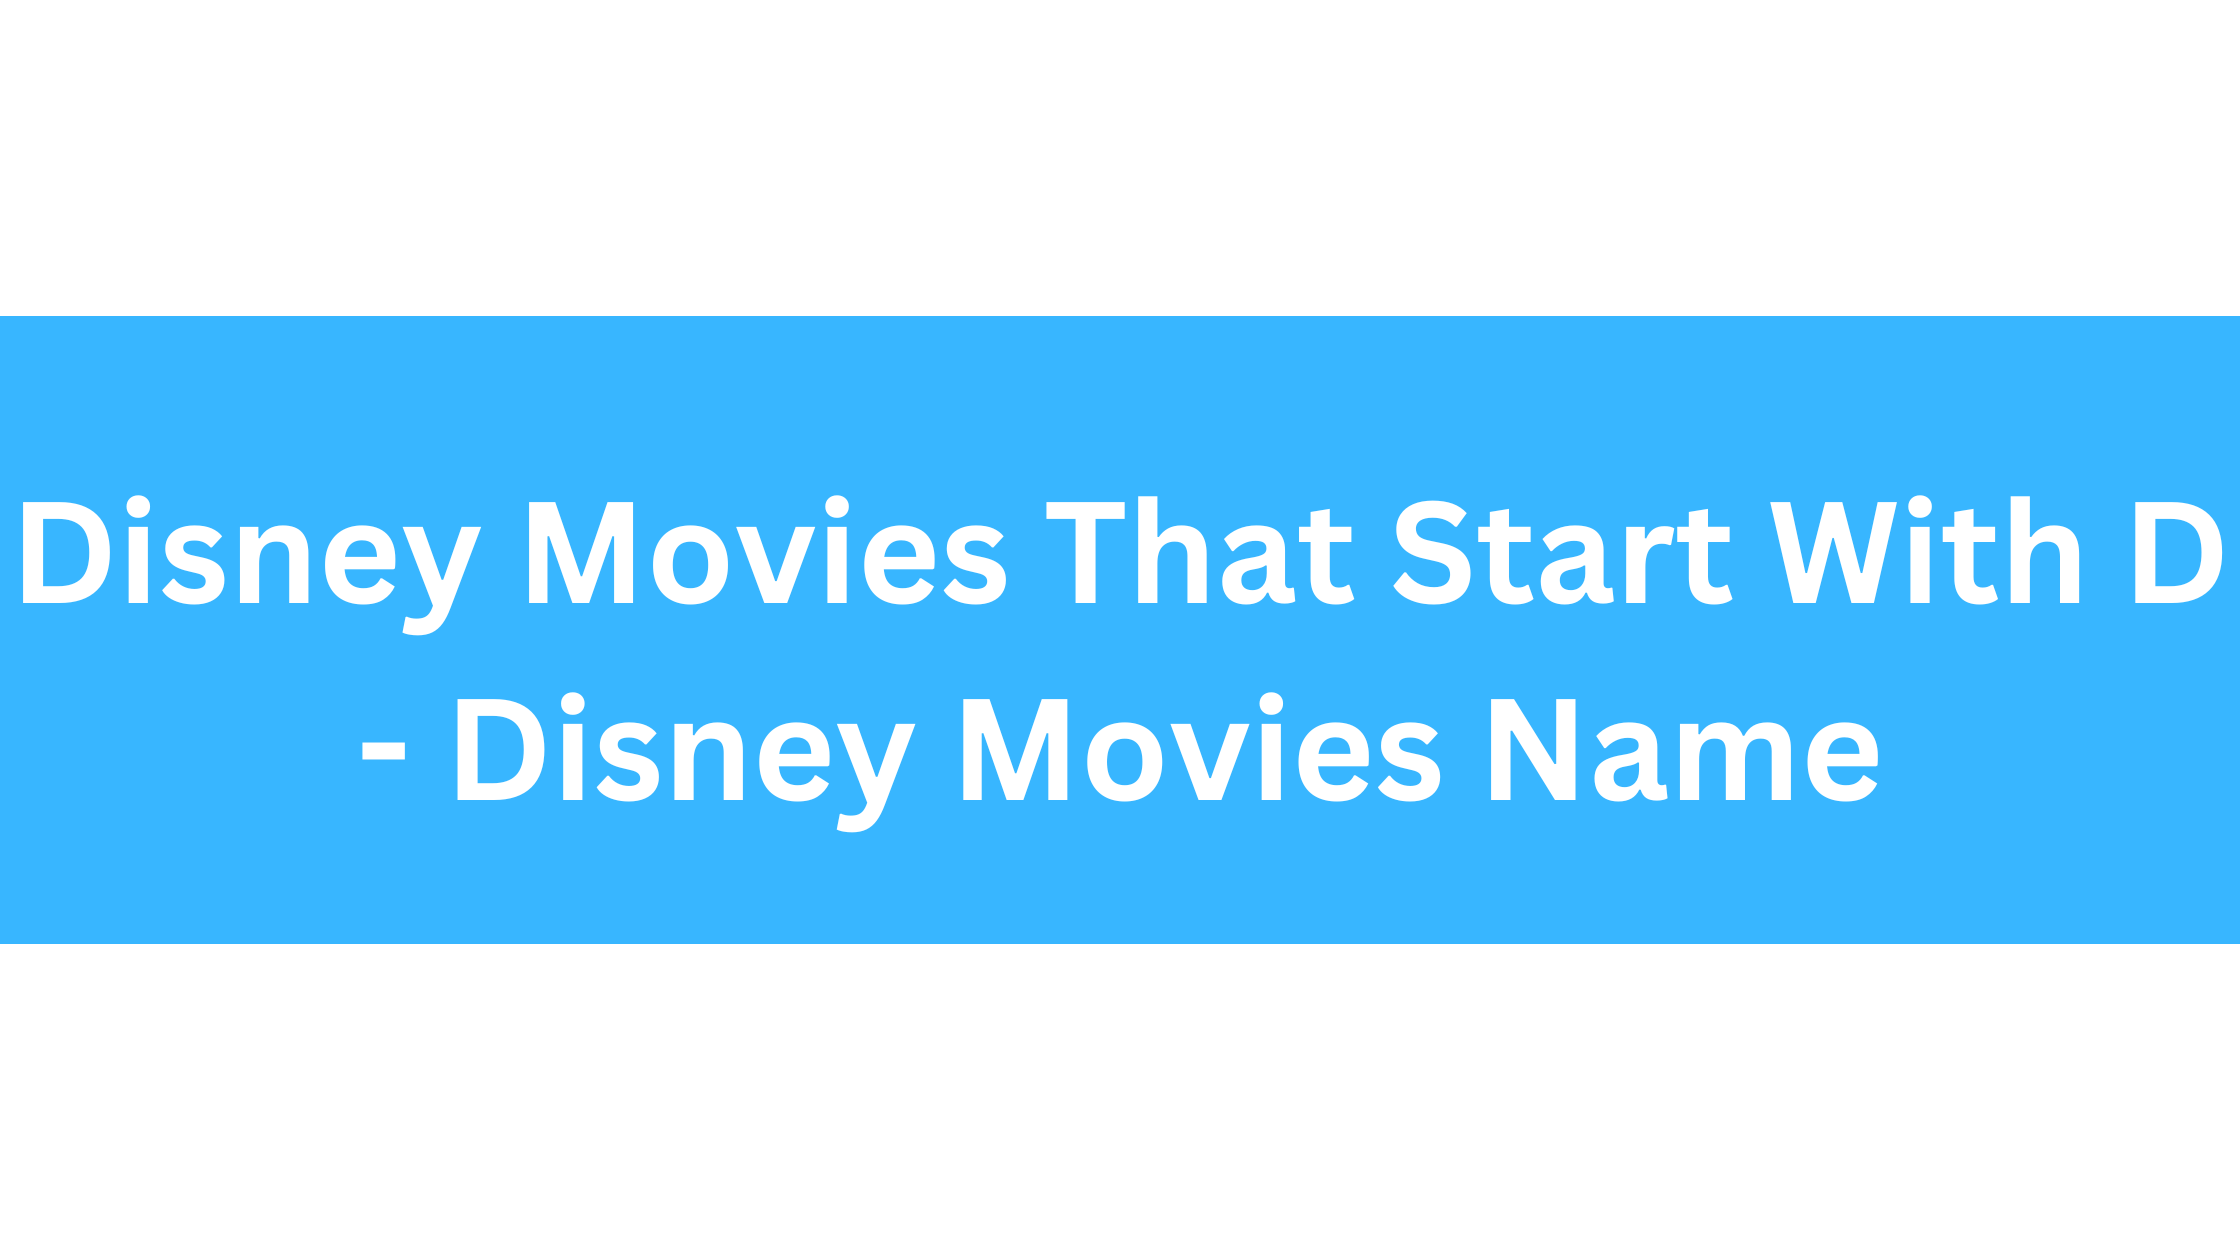 Disney Movies That Start With D